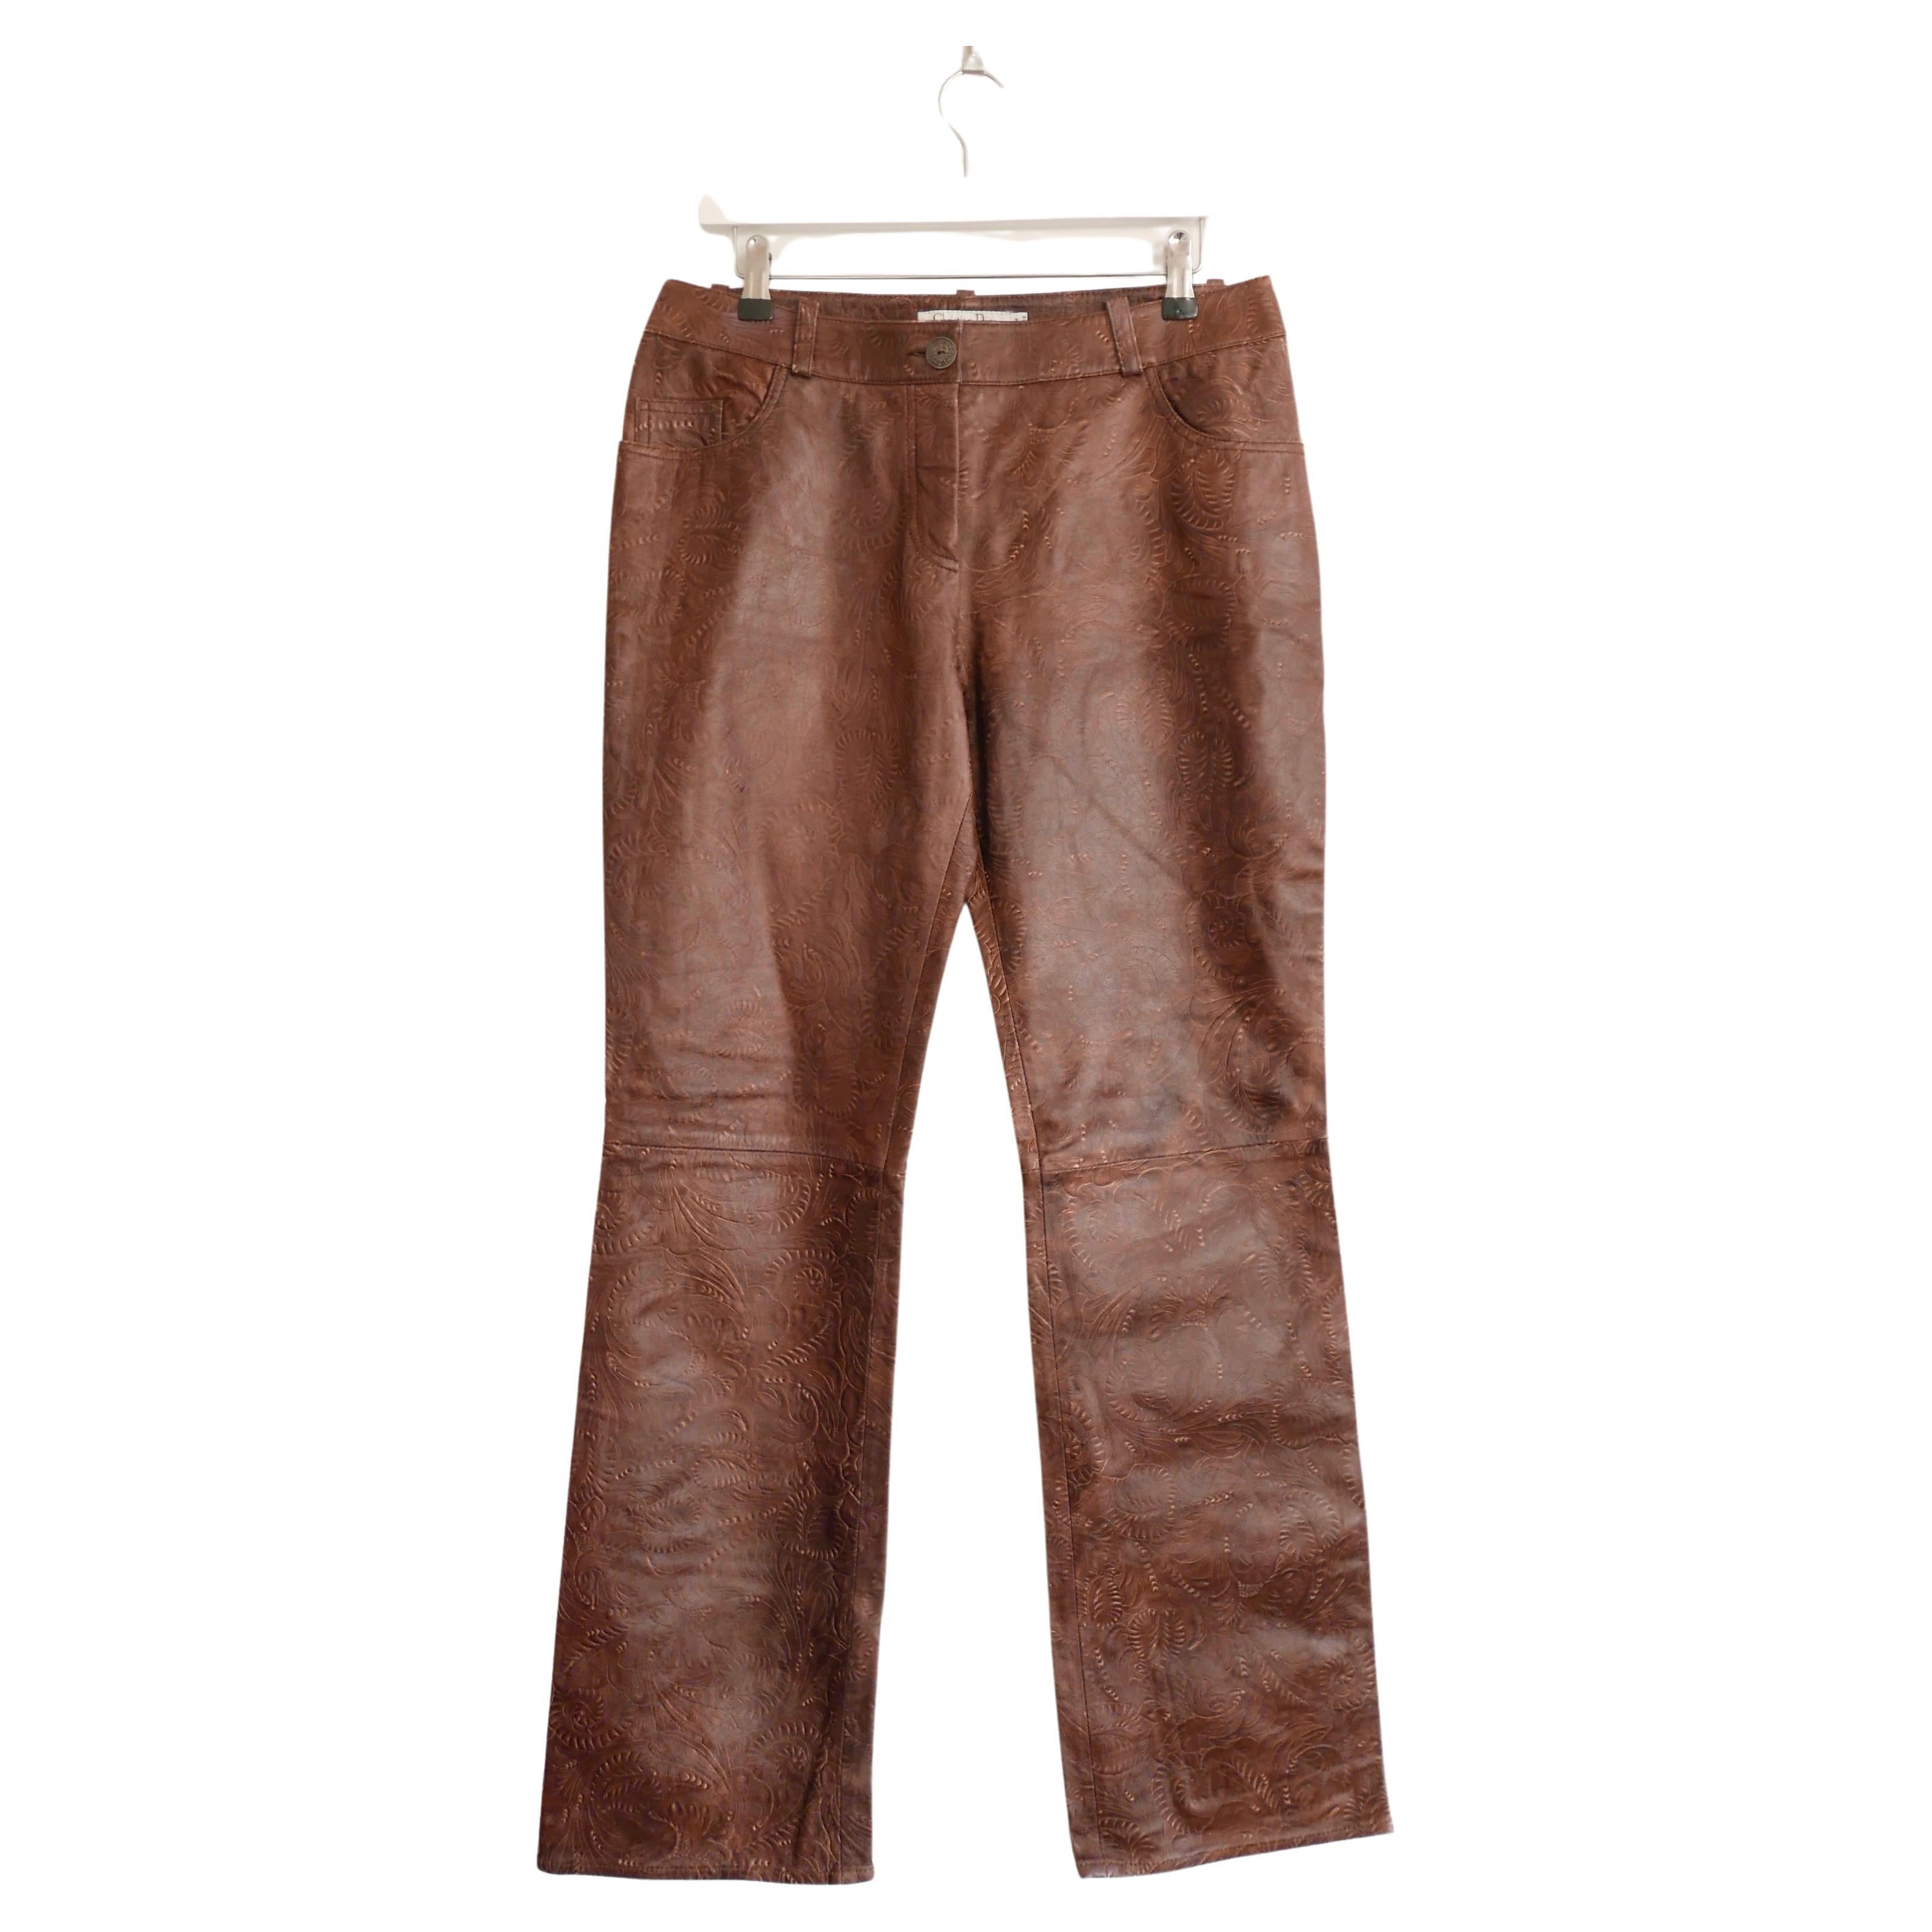 Christian Dior x Galliano 2006 Tooled Leather Trousers For Sale